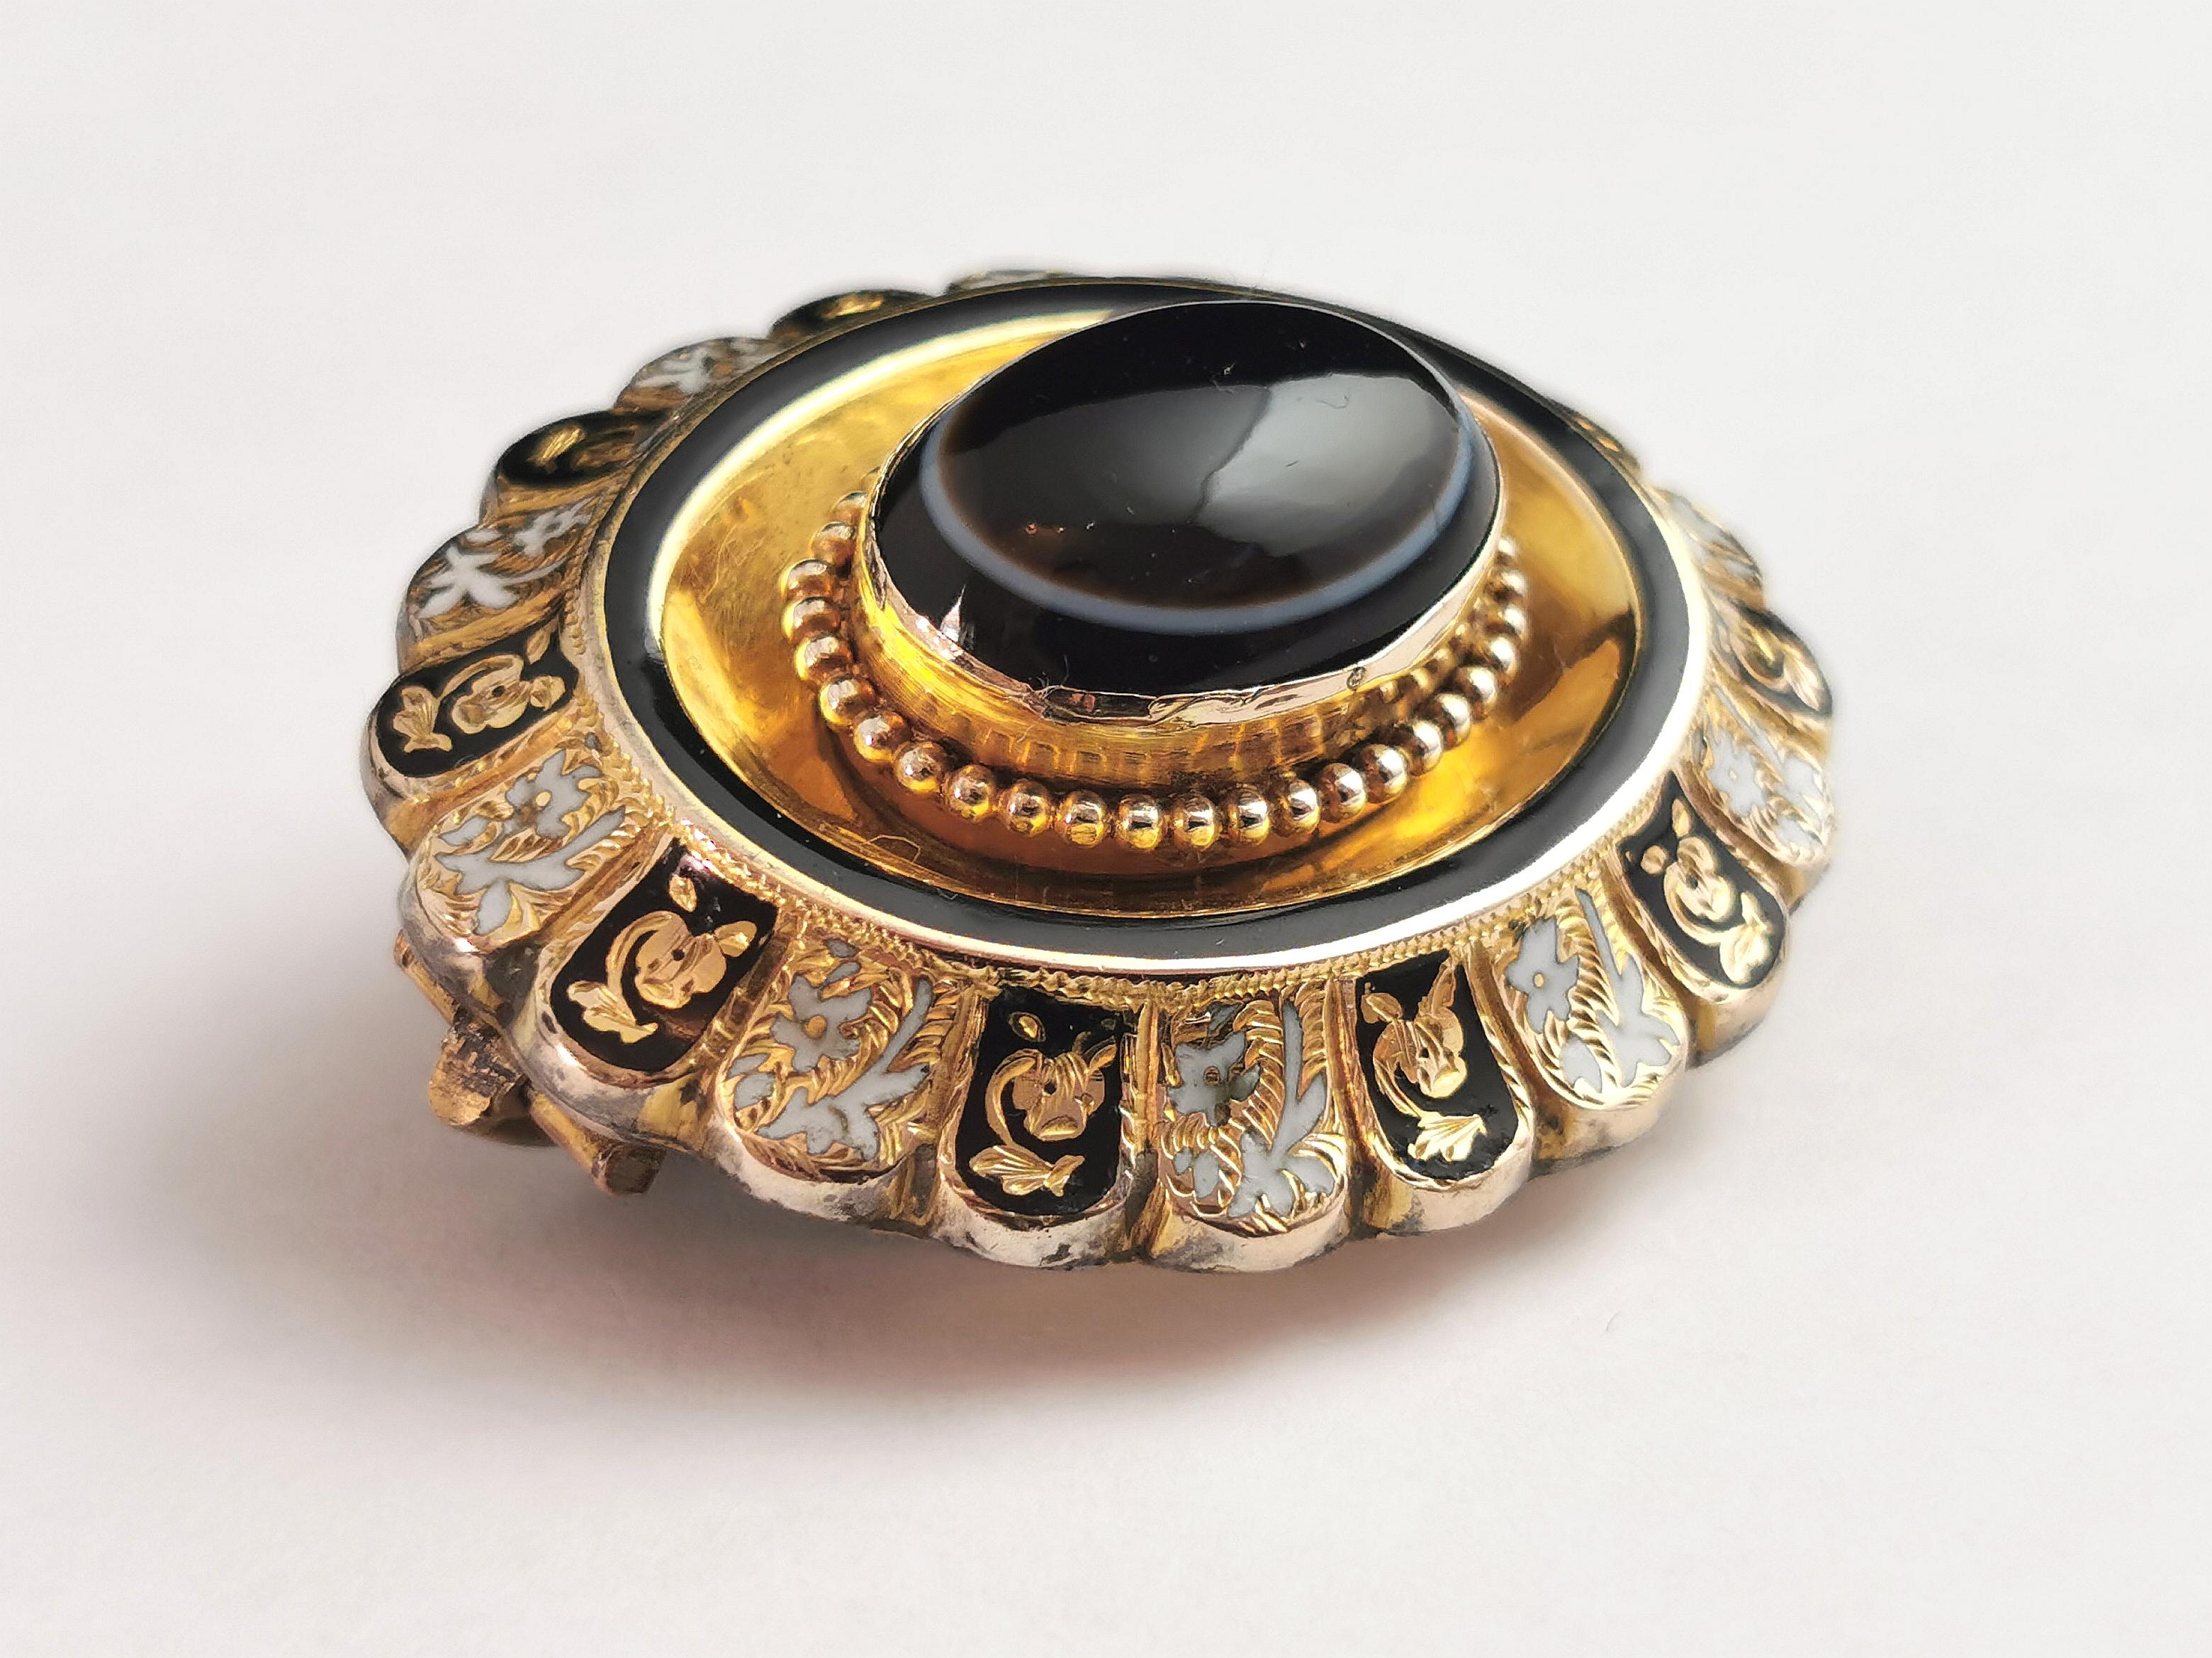 Antique Banded Agate Mourning Brooch, 9k Gold, Black and White Enamel, Victorian For Sale 6